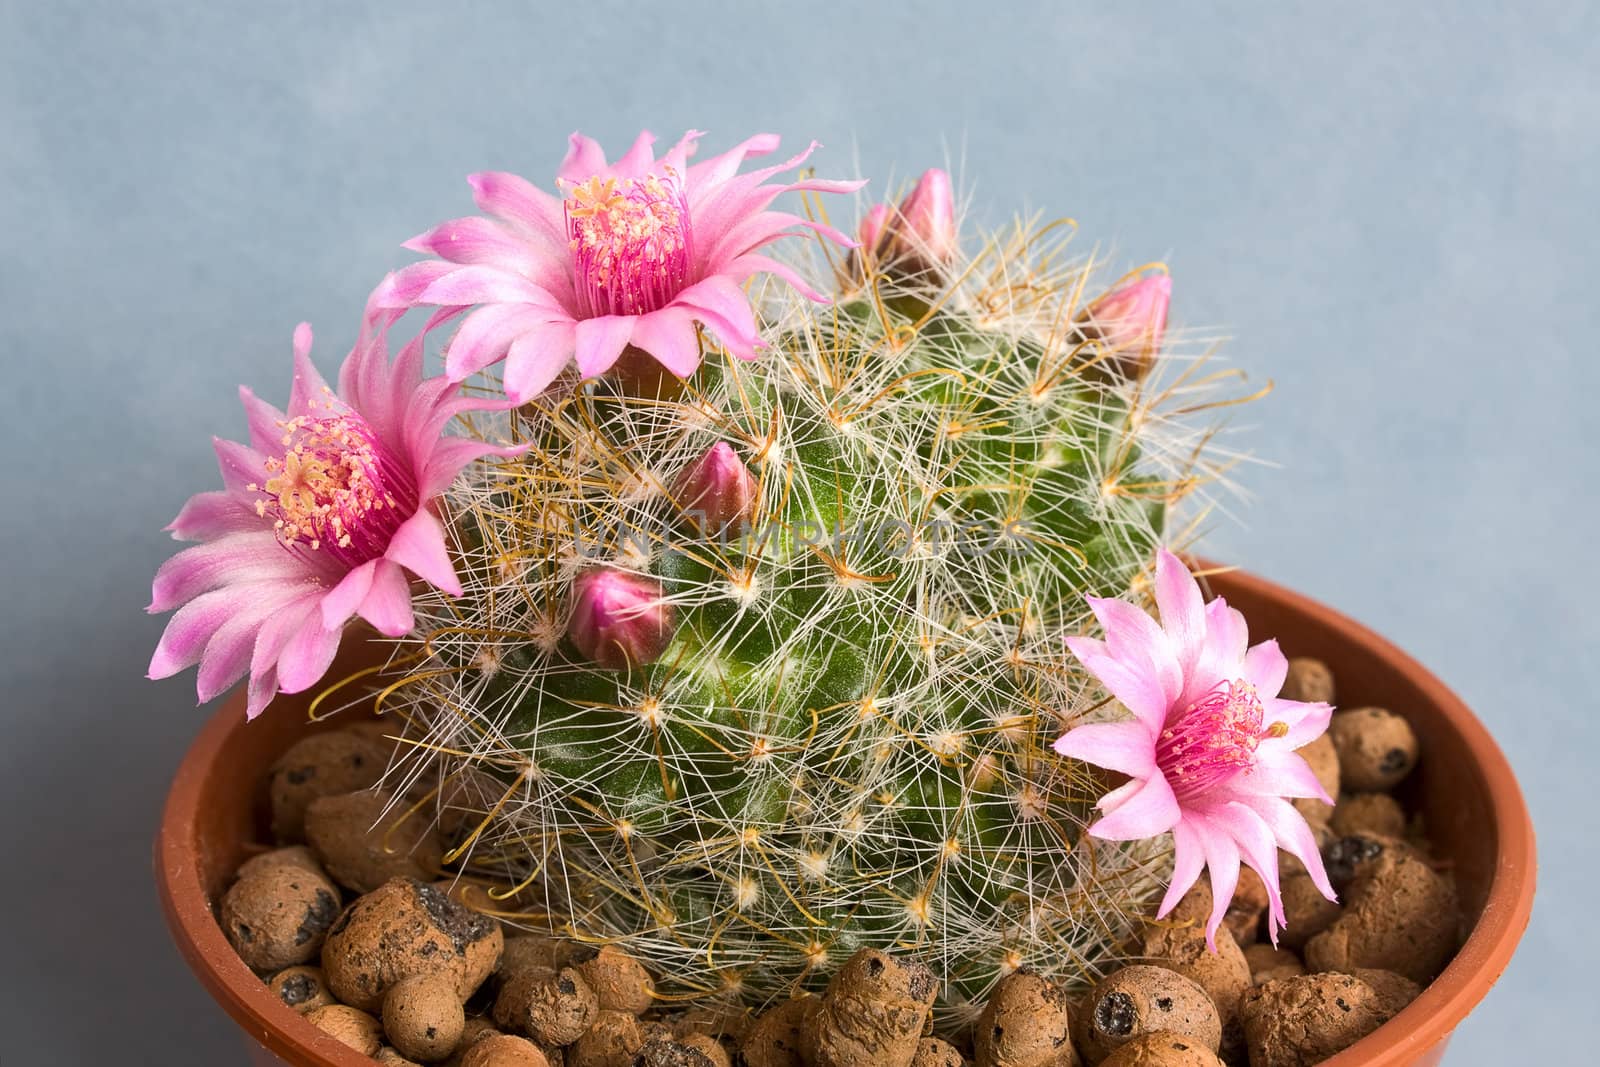 Cactus with blossoms on a dark background (Mammillaria).